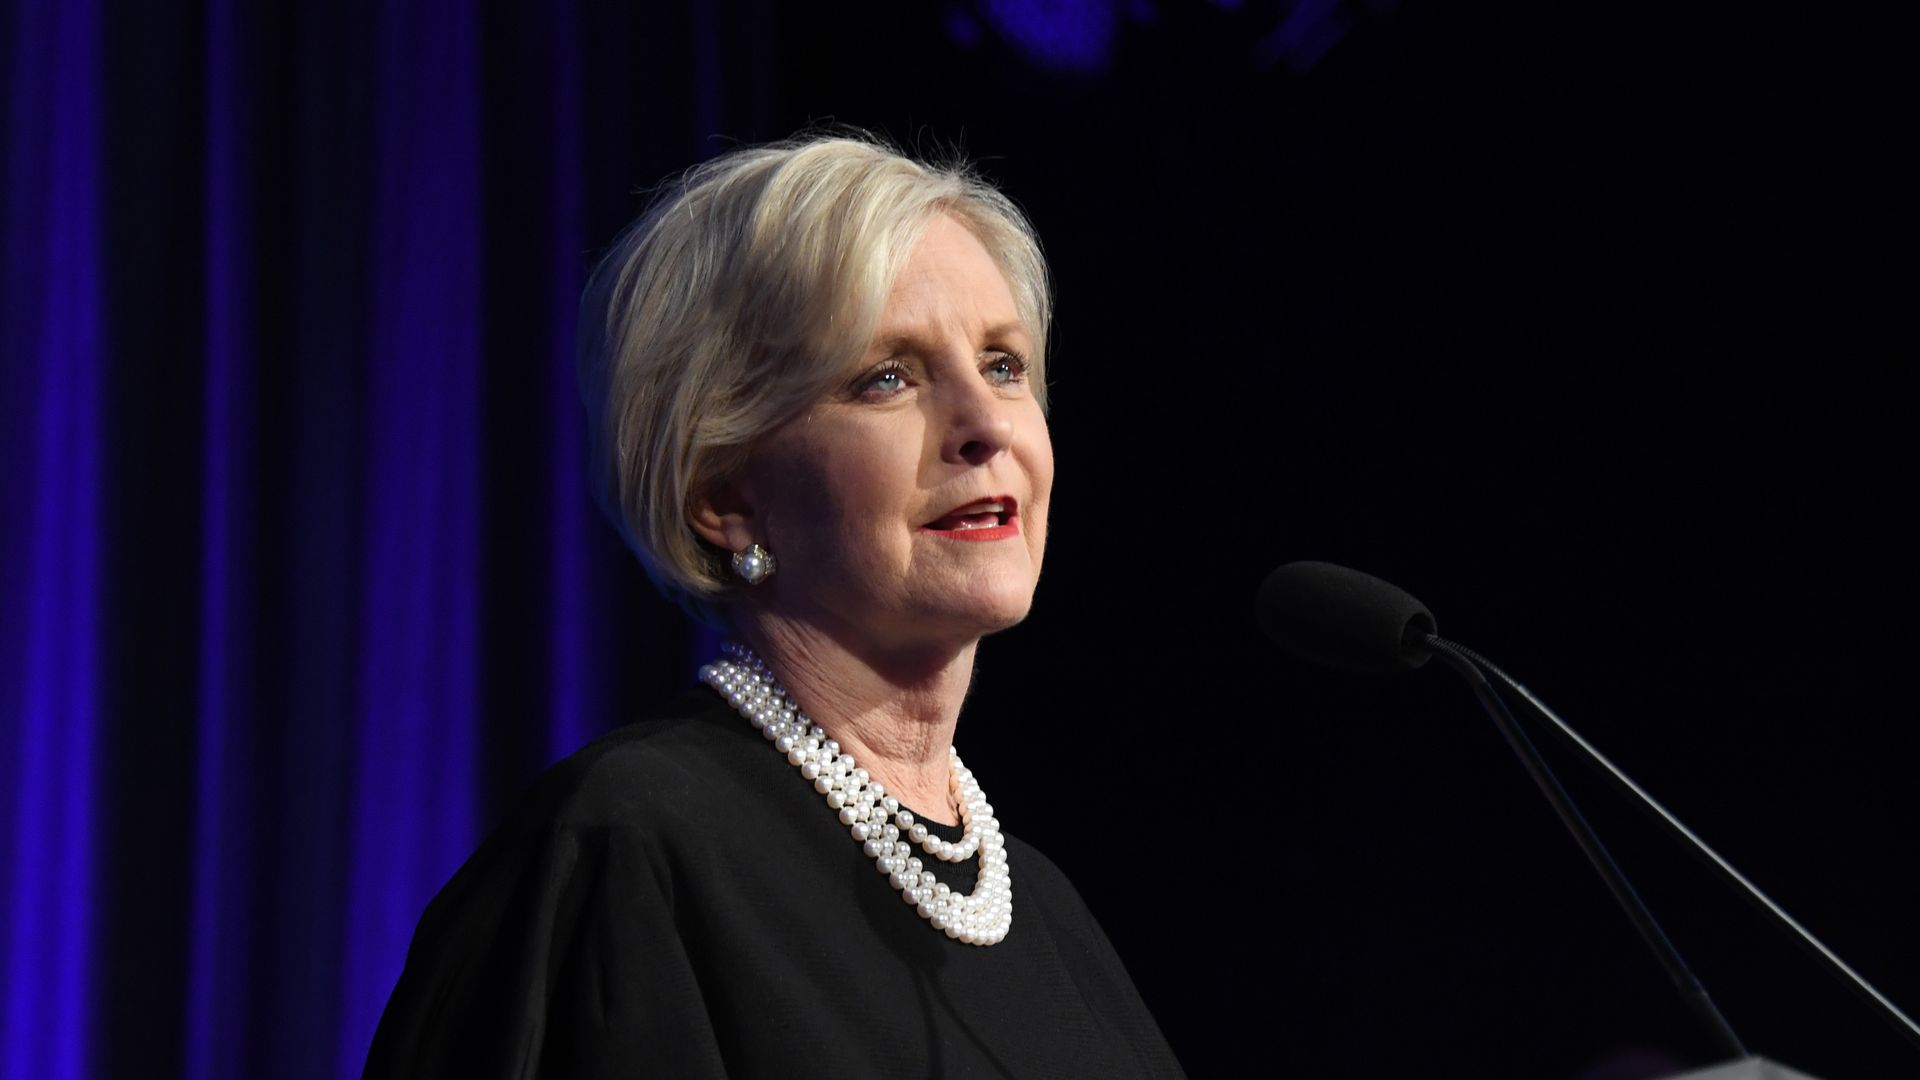 Photo of Cindy McCain in a black outfit speaking from a podium